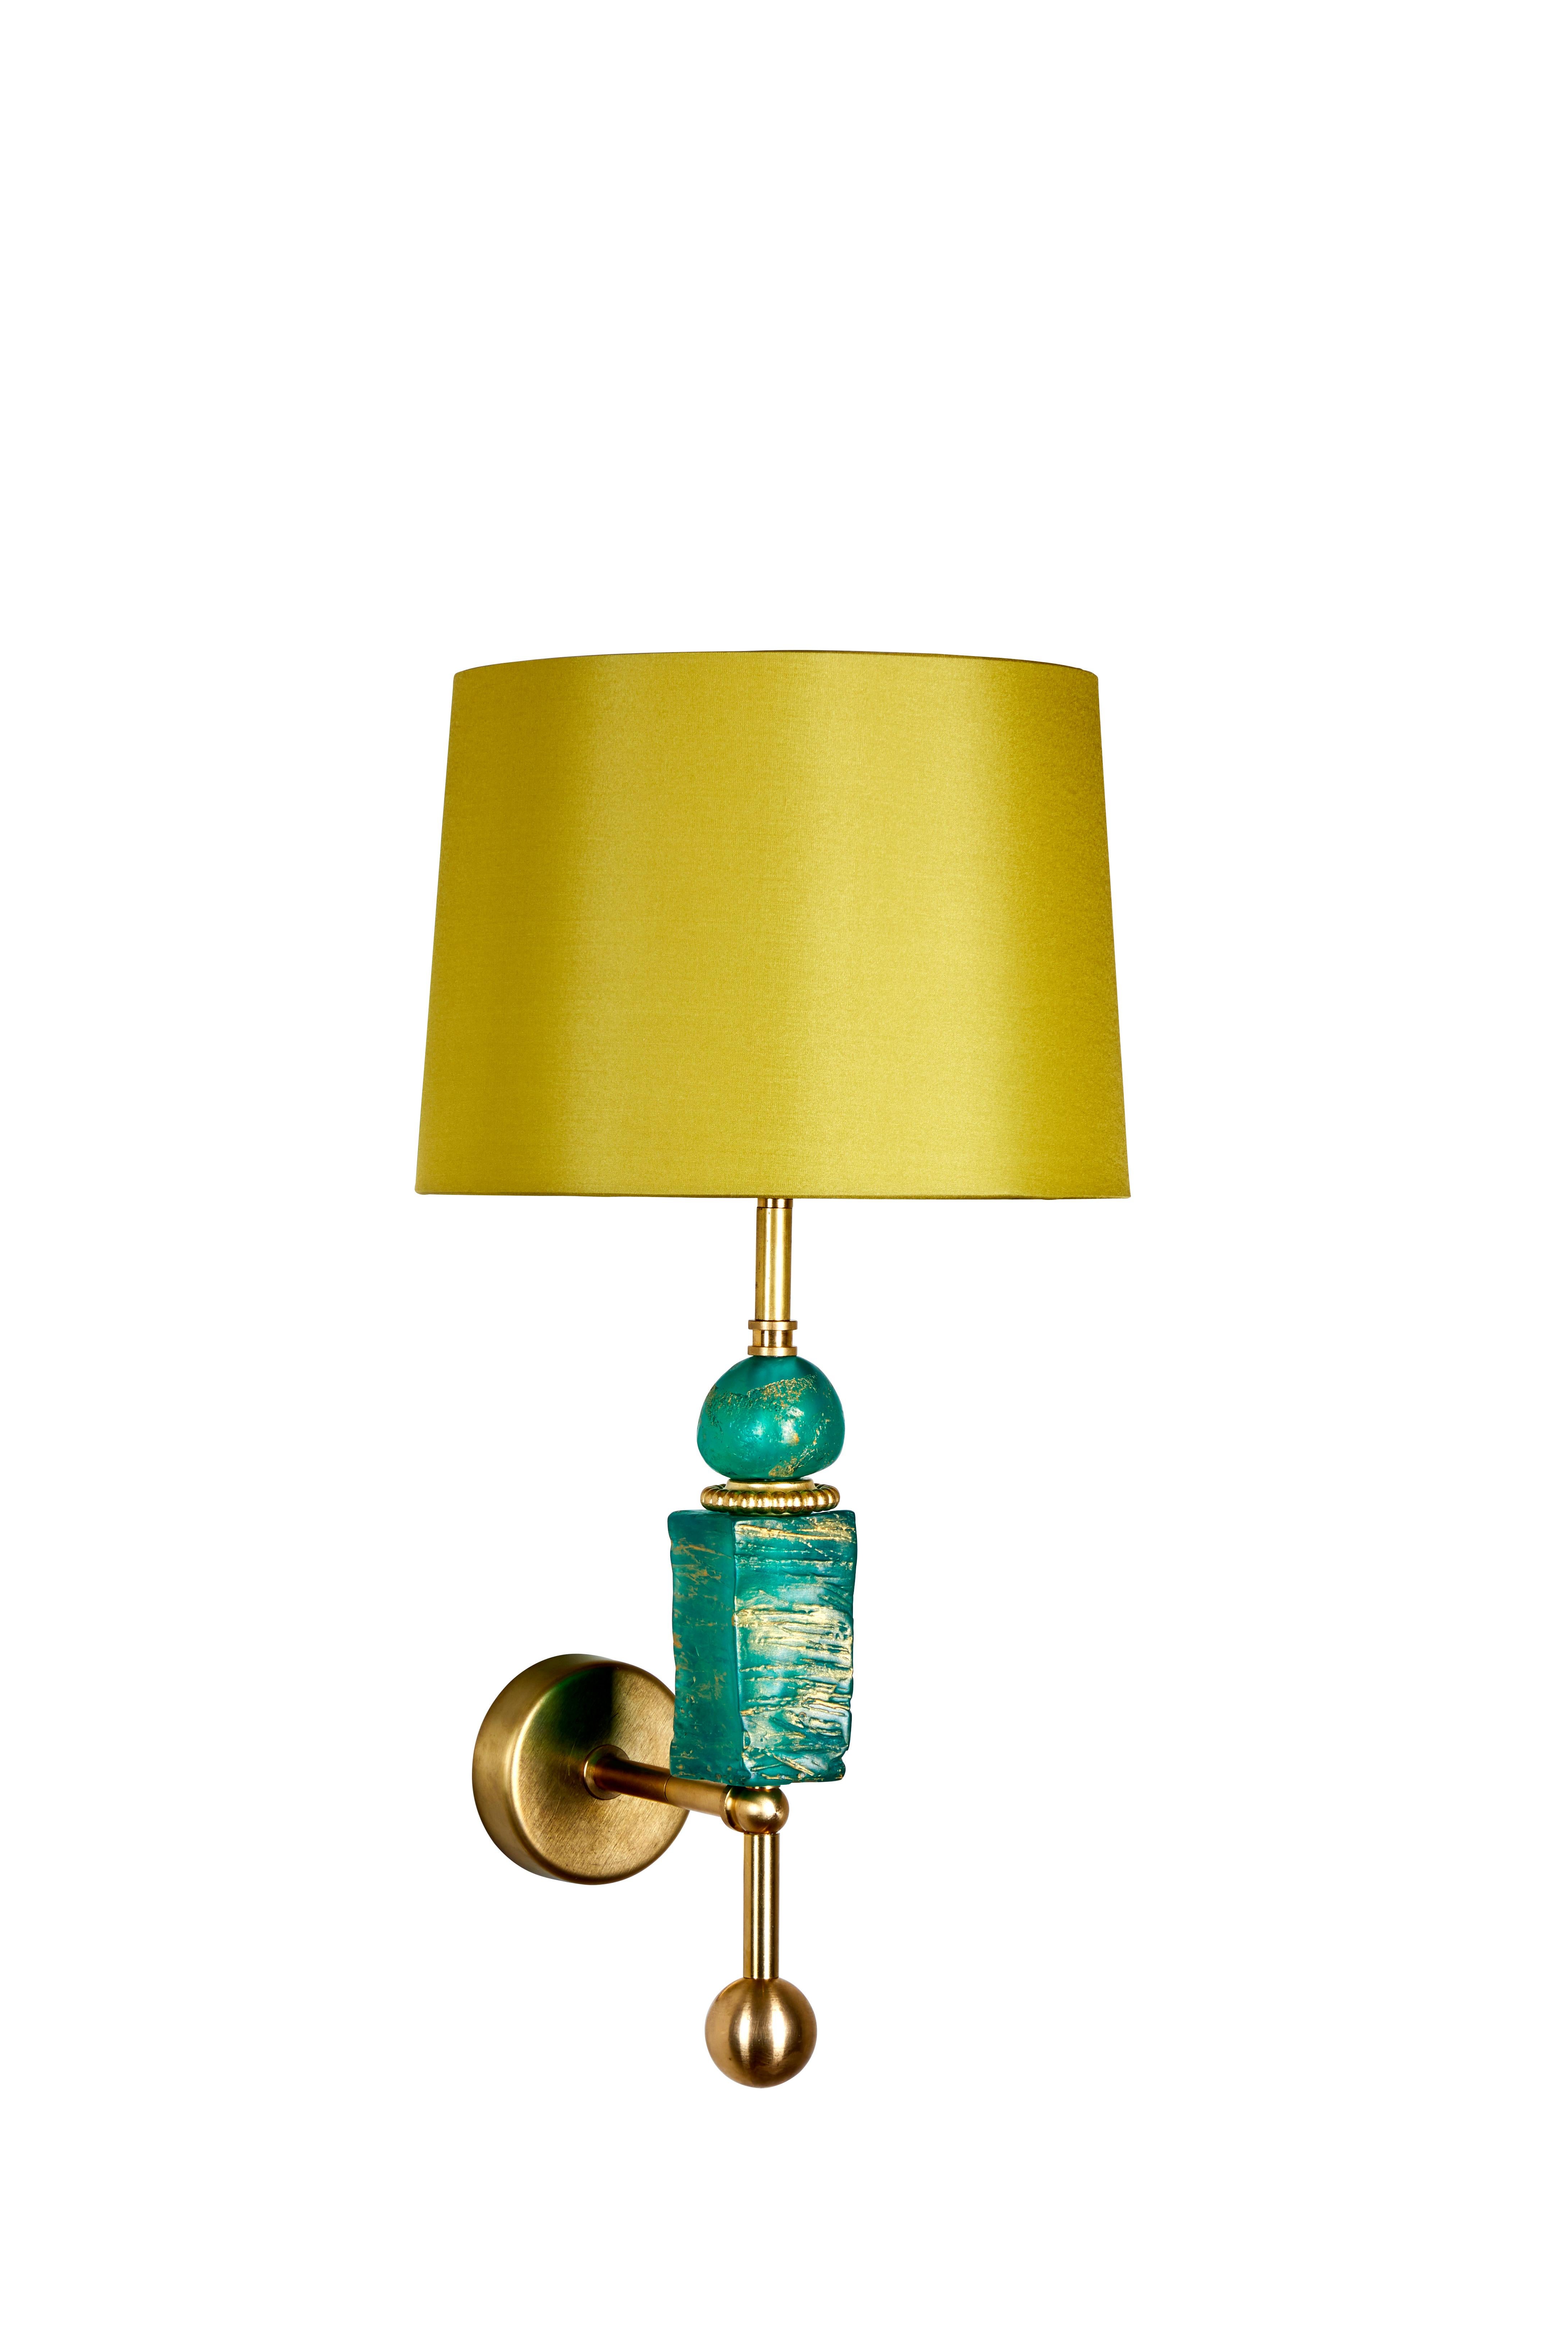 This Margit Wittig wall light with emerald resin hand-sculpted components is cast in her London-based studio.
The hand-patinated gold finish enhances the organic surface texture, a brass detail adds interest to this object of art which provides a